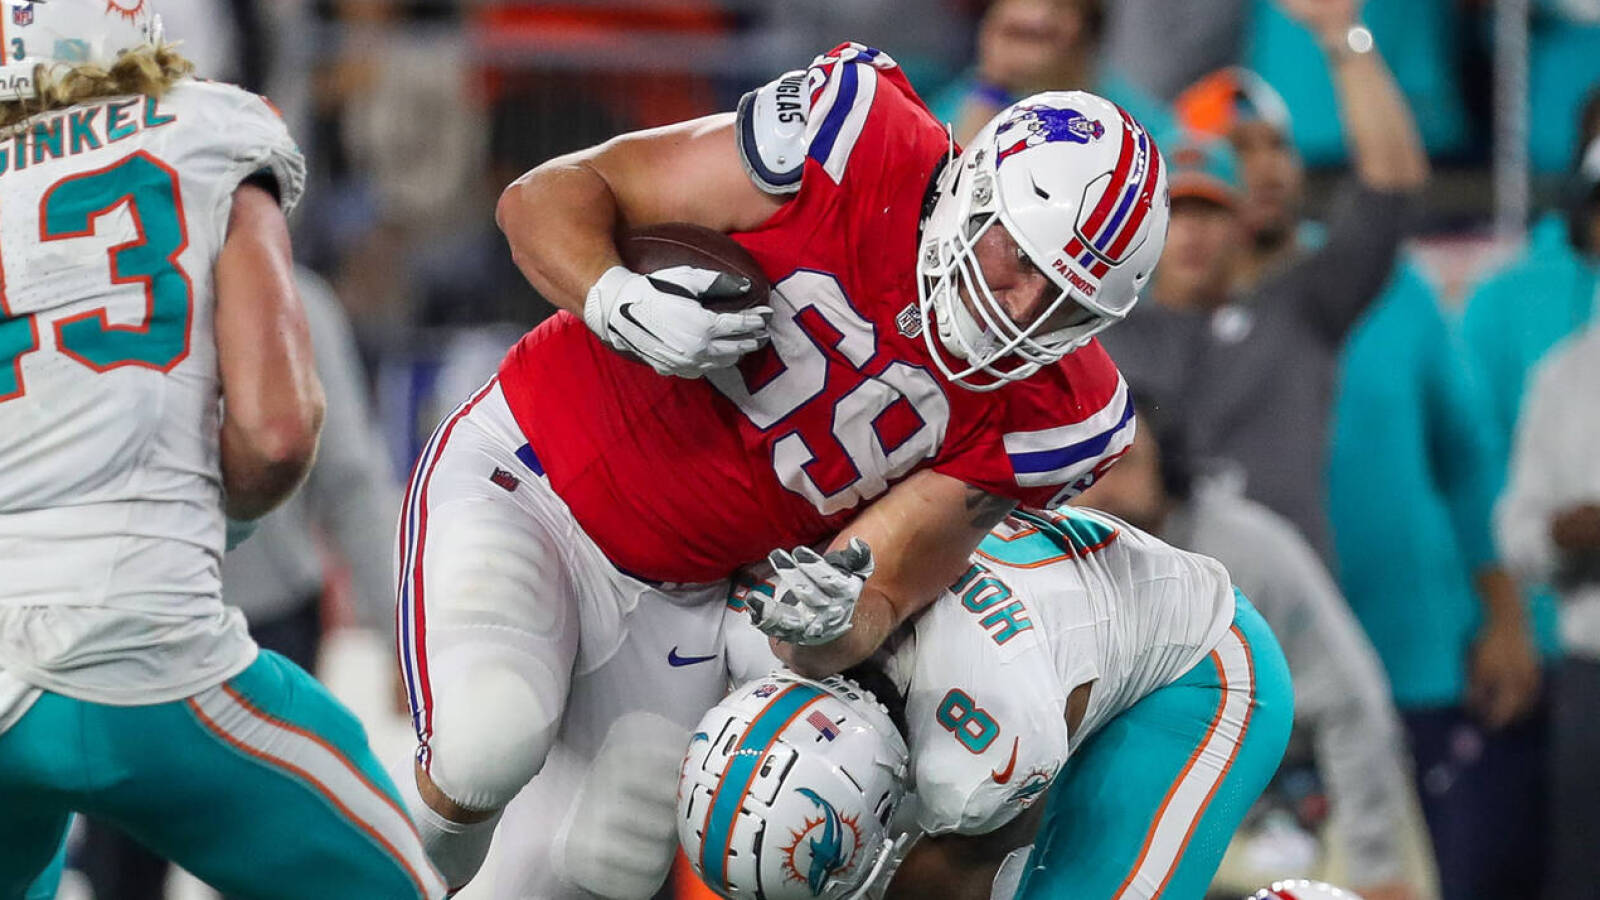 Watch: Patriots lose after offensive lineman Cole Strange is ruled down following desperation lateral